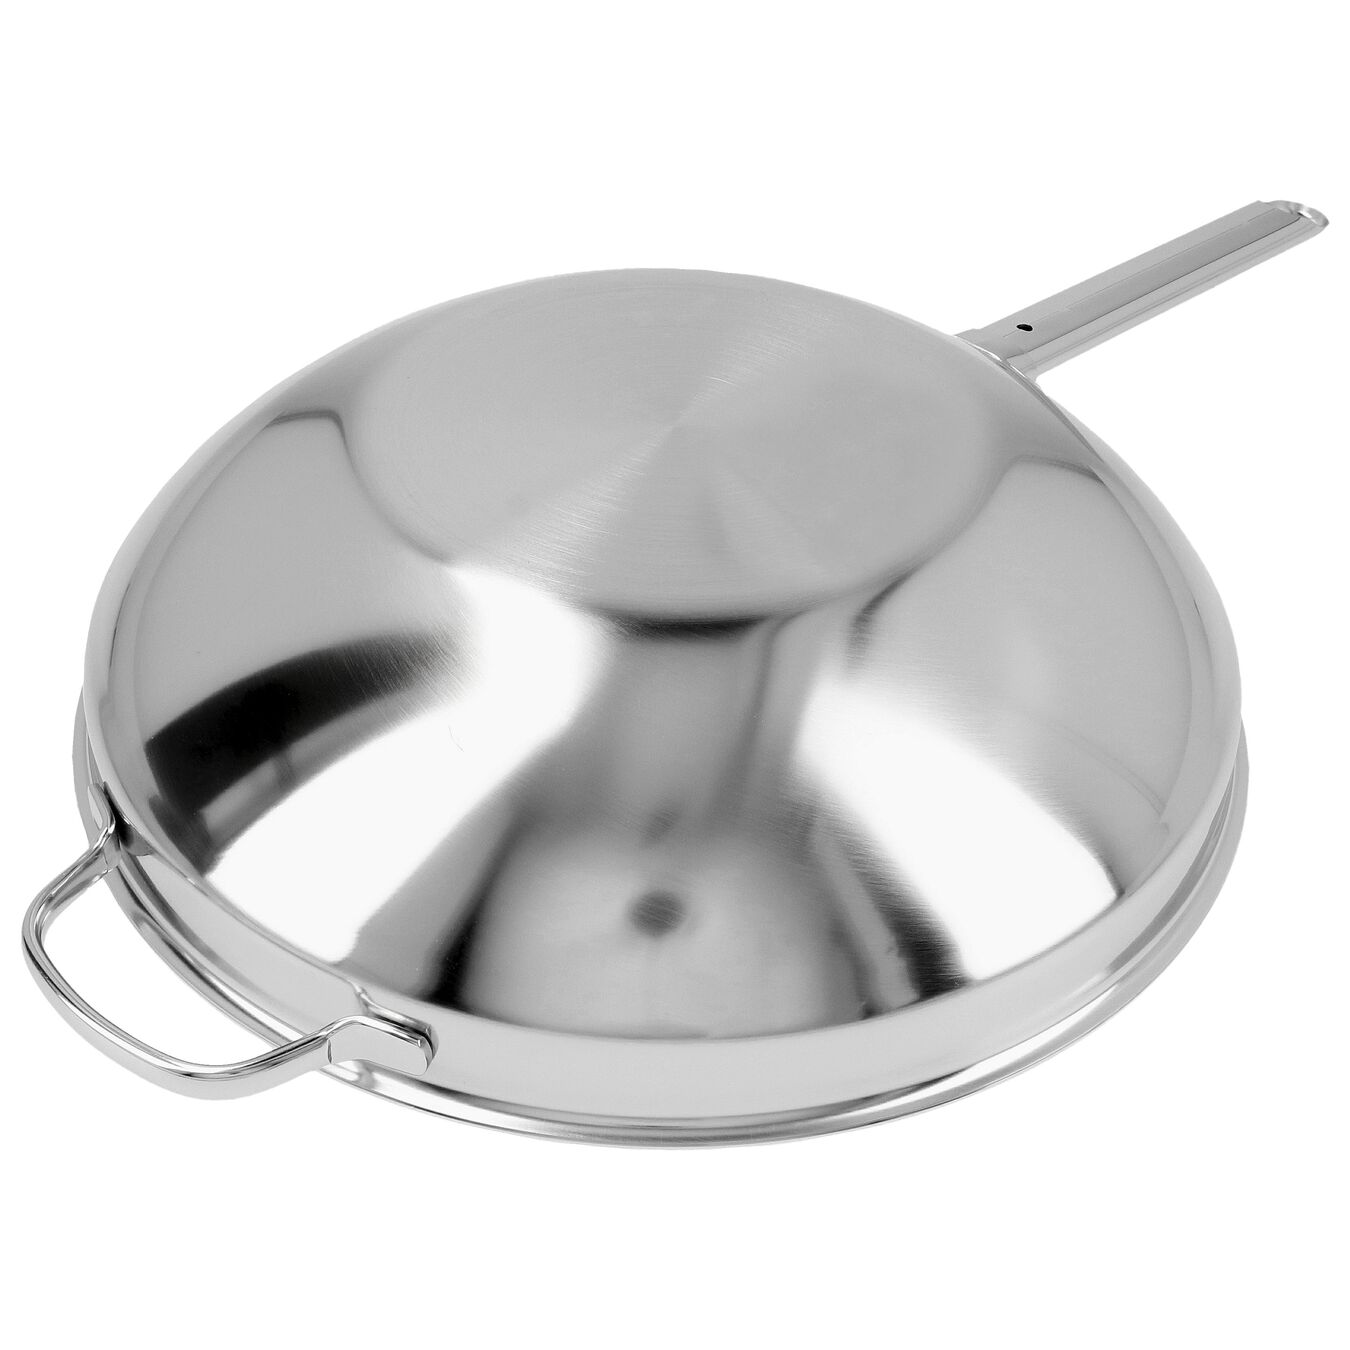 12.5-inch, 18/10 Stainless Steel, Flat Bottom Wok with Helper Handle, silver,,large 4